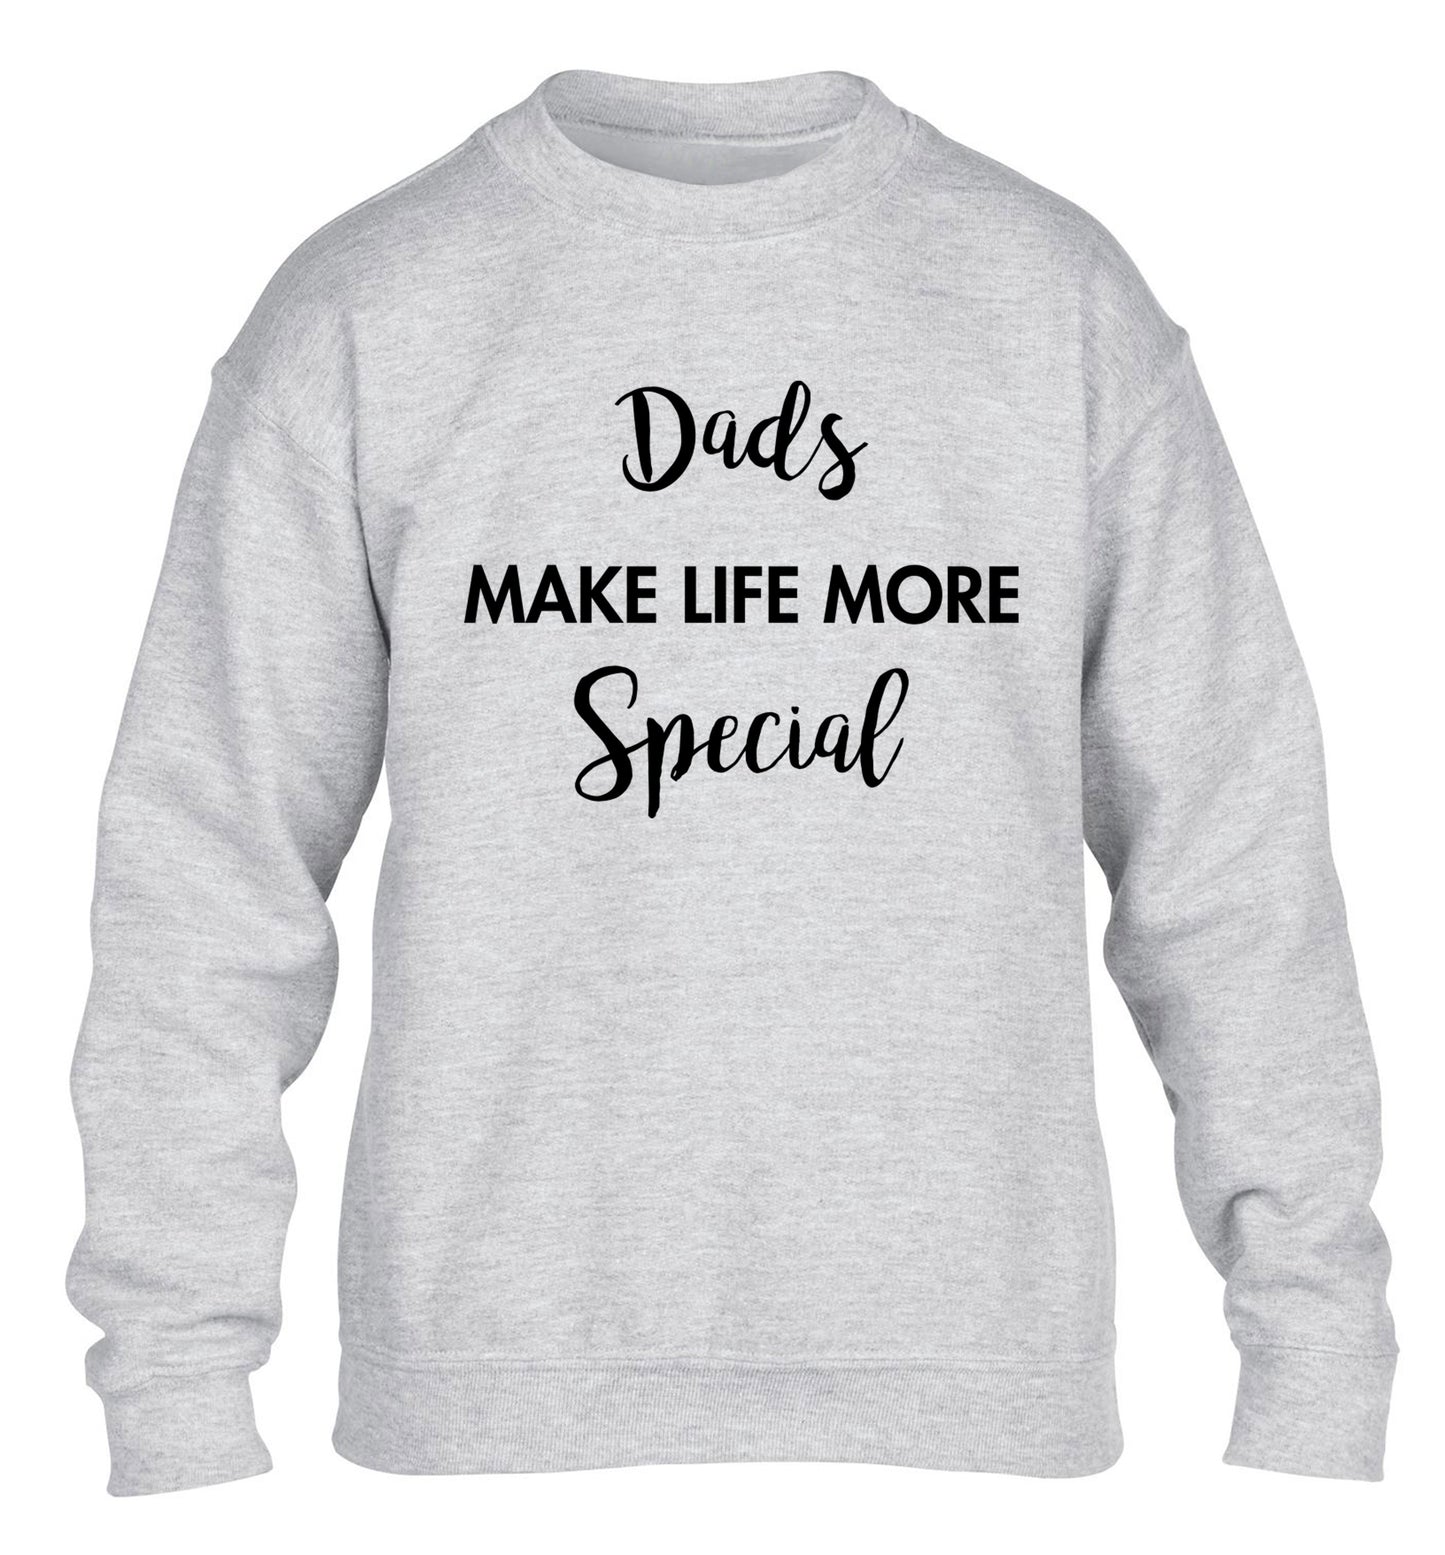 Dads make life more special children's grey sweater 12-14 Years